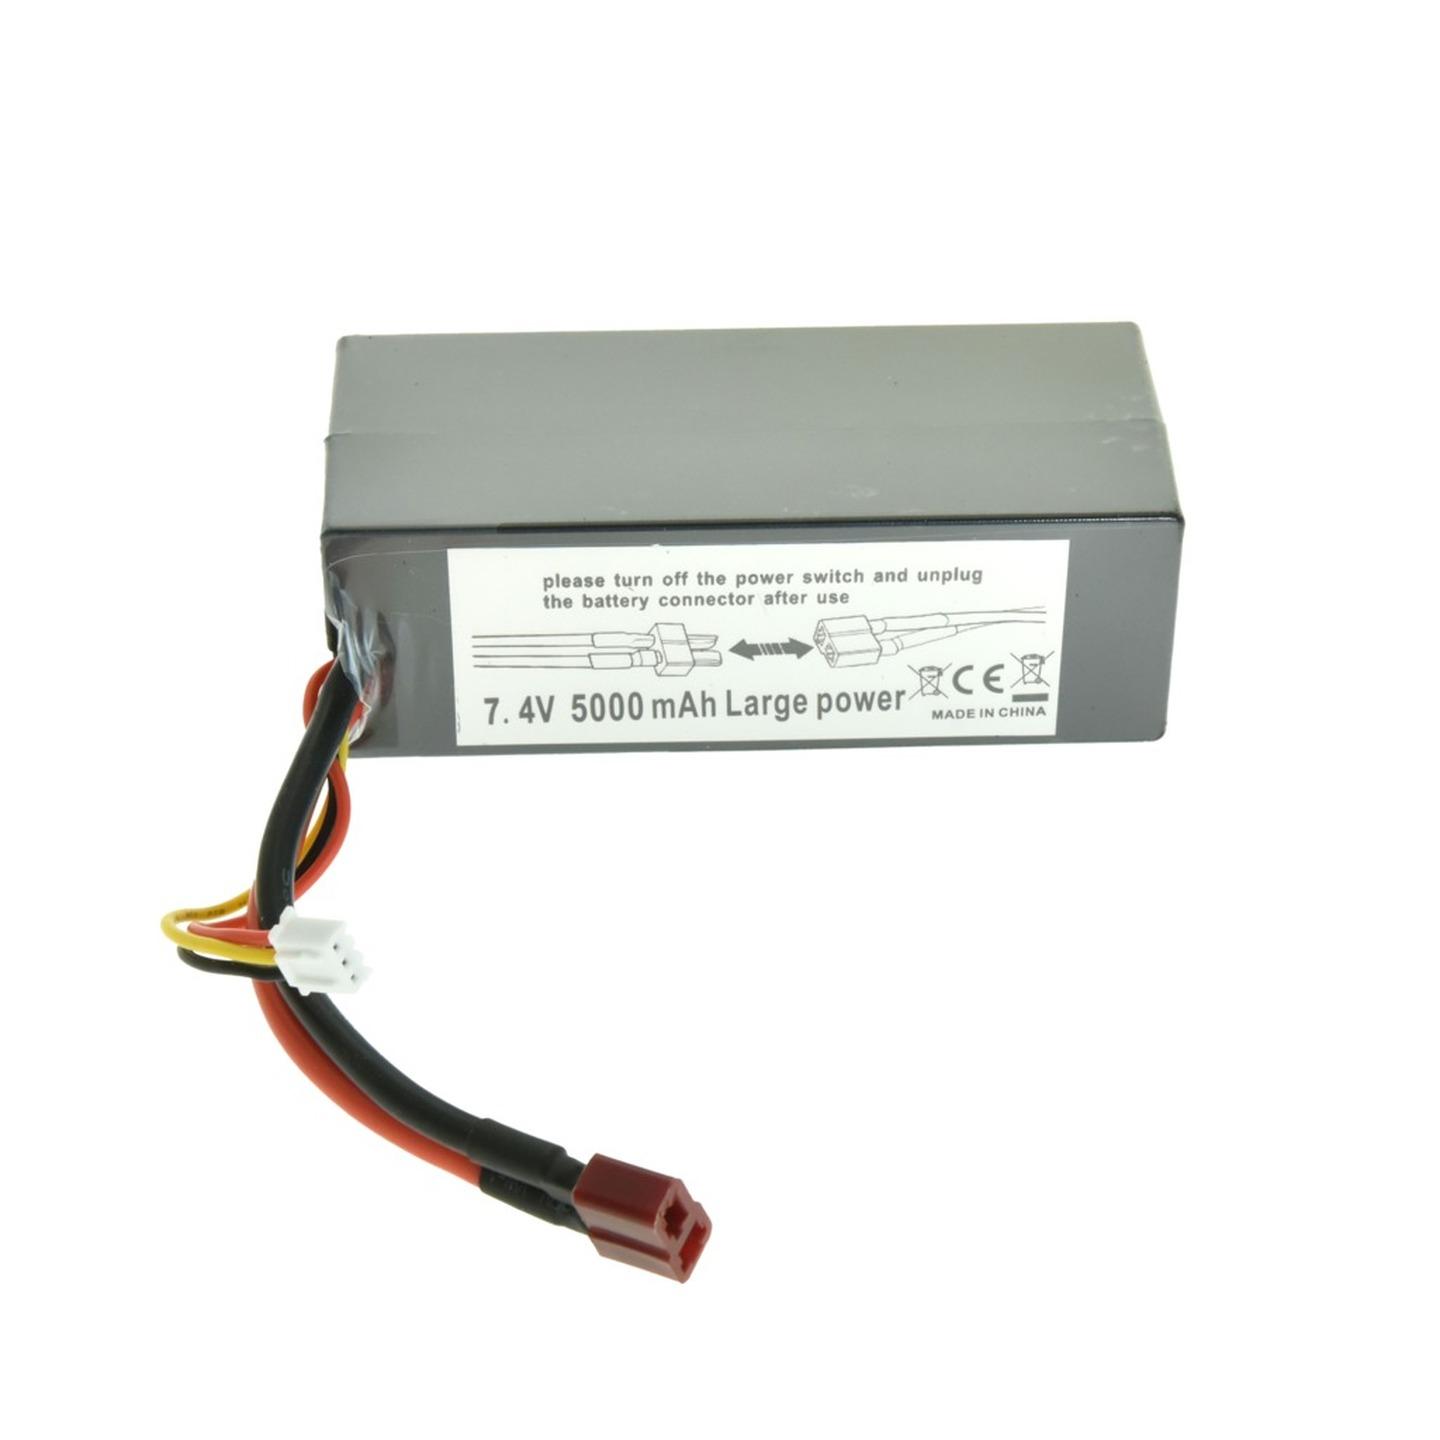 Spare 7.4V 5000mAh Battery to Suit GT4800 R/C Car